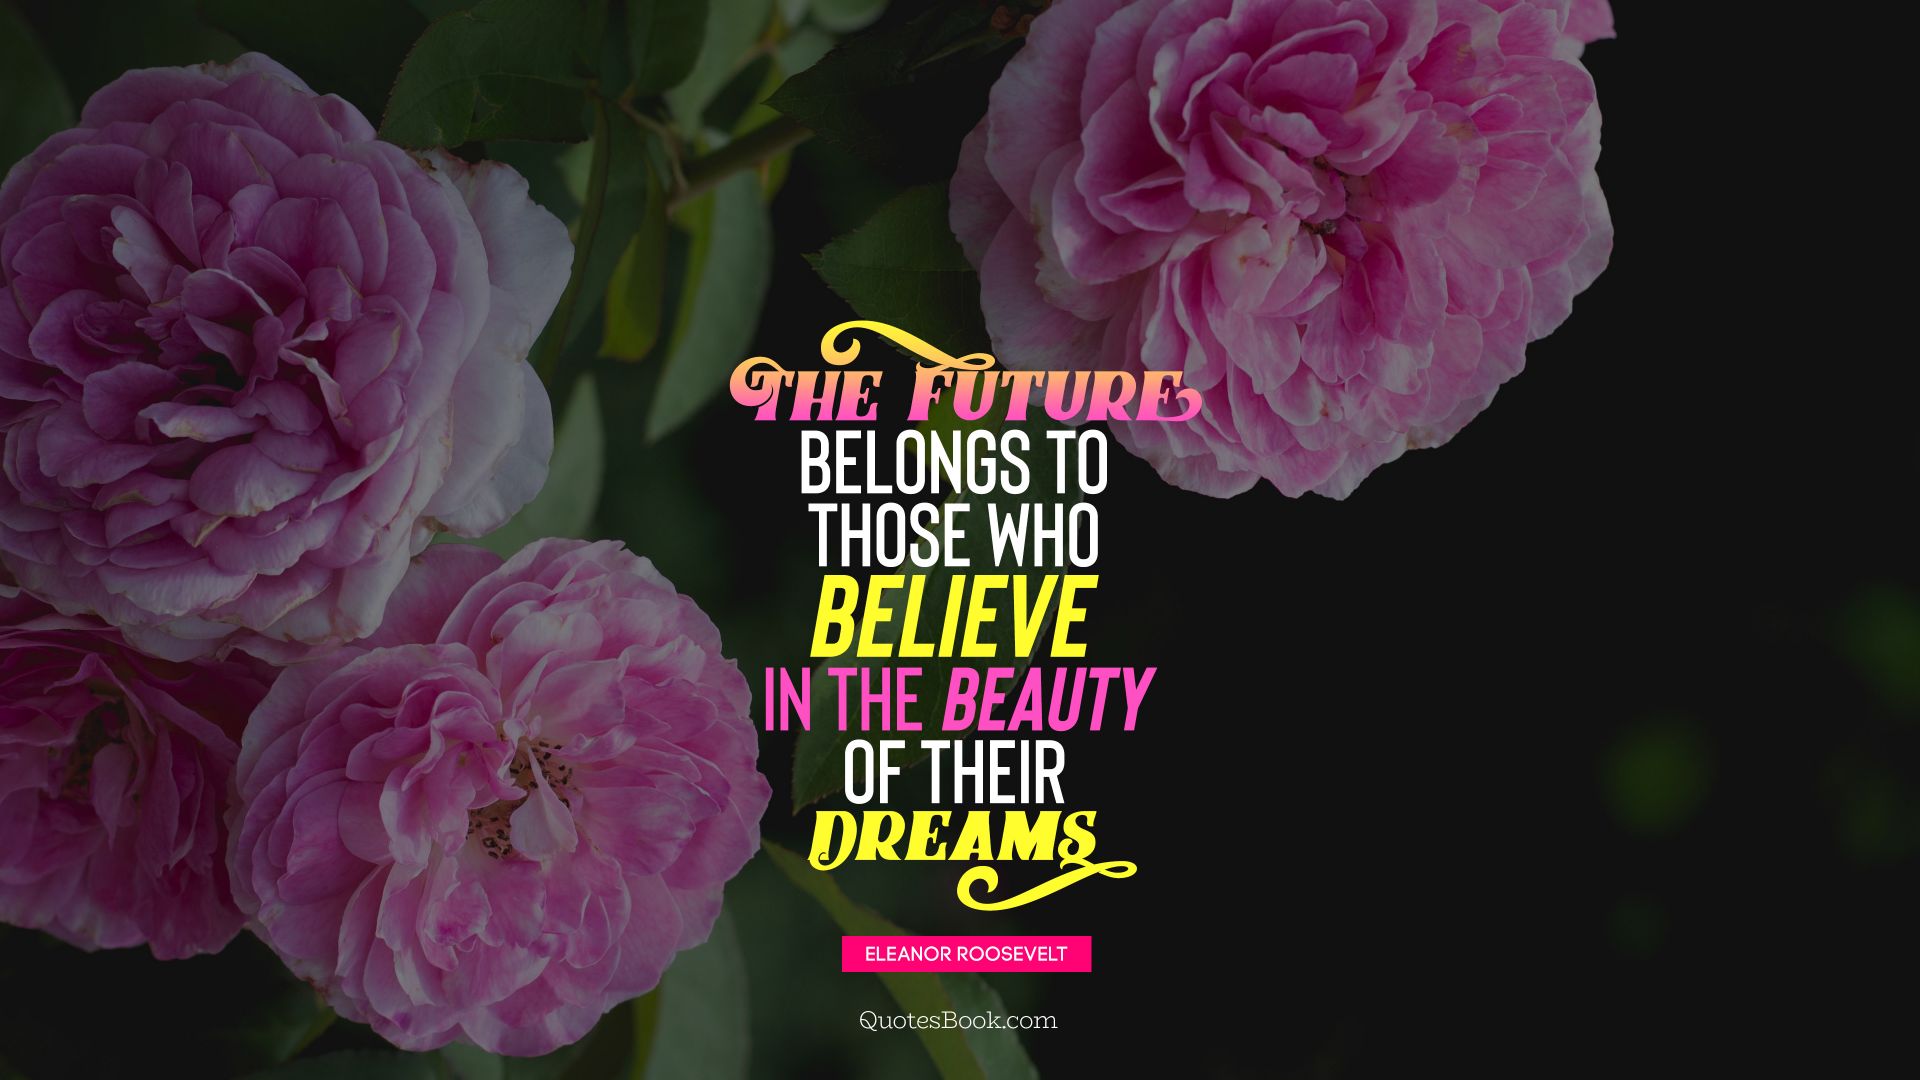 The future belongs to those who believe in the beauty of their dreams. - Quote by Eleanor Roosevelt